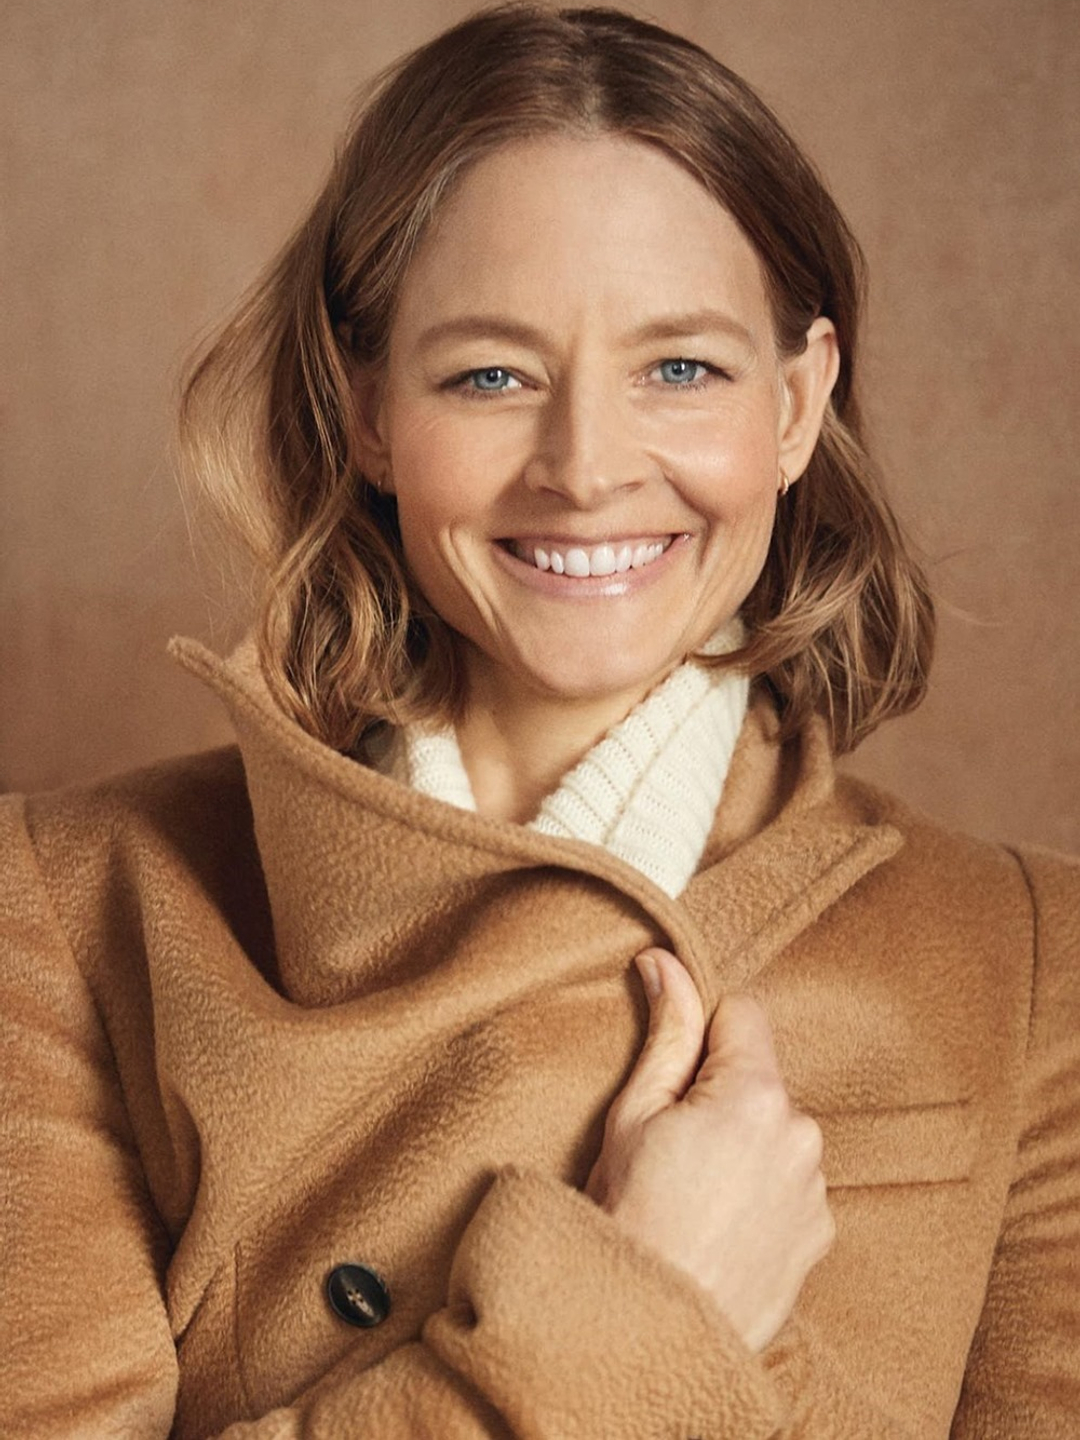 Jodie Foster young pics